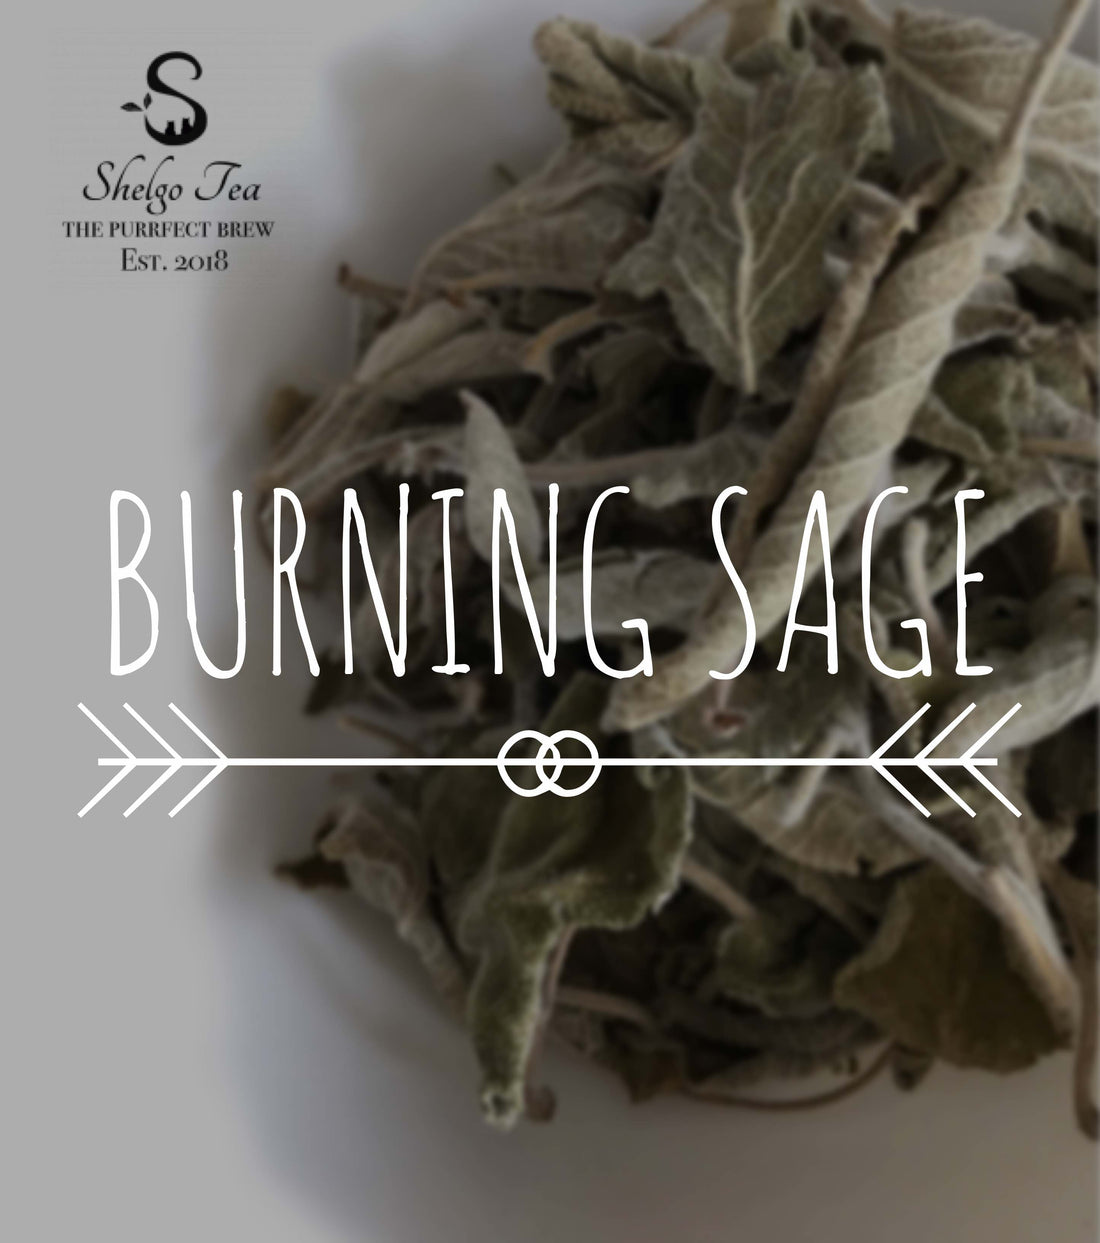 Burning Sage Benefits: Can it Cleanse your Home?